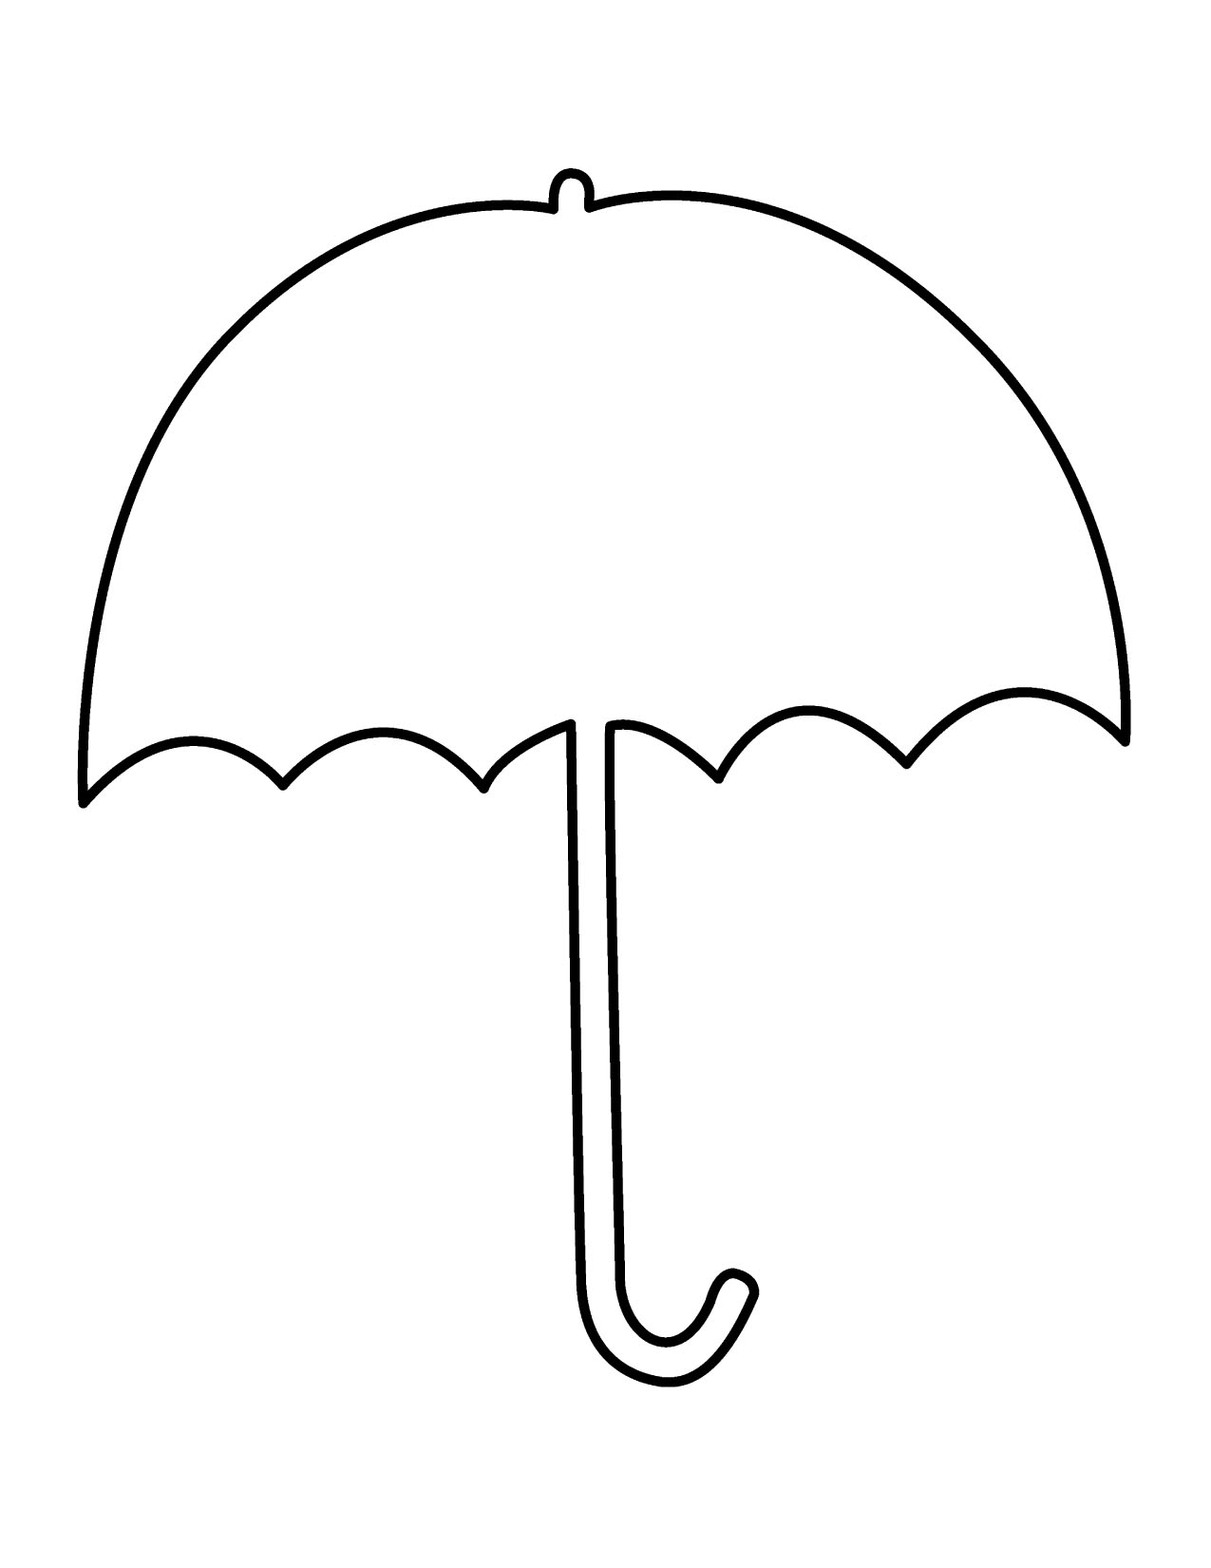 Pictures Of Umbrellas To Color Clipart - Free to use Clip Art Resource